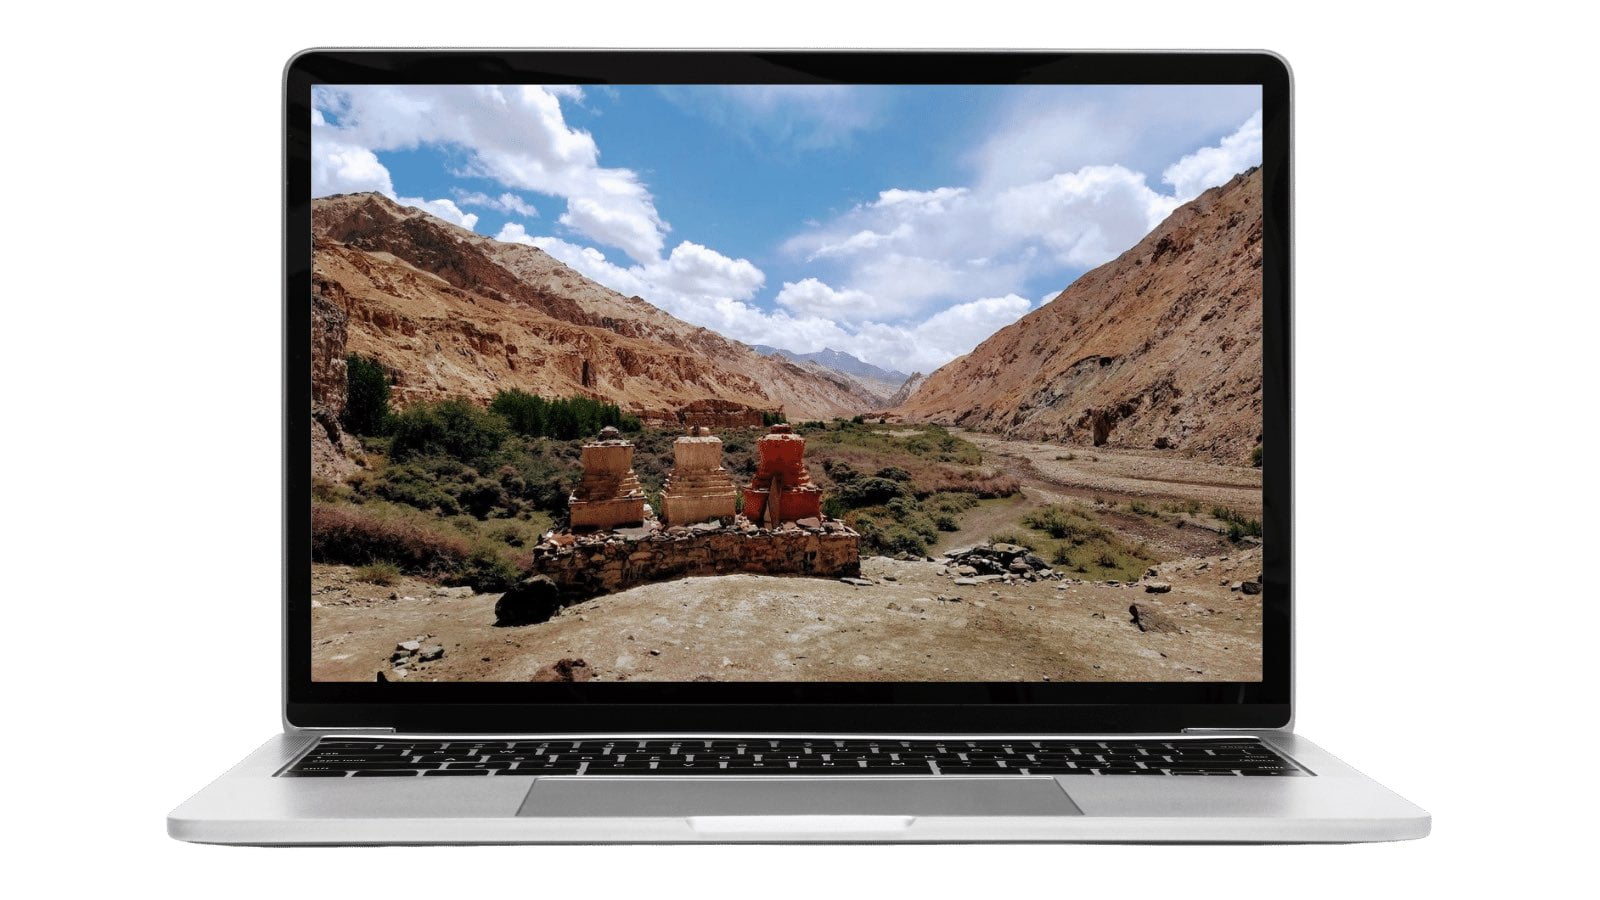 Laptop with background of buddhist stupas in the mountains | Web design